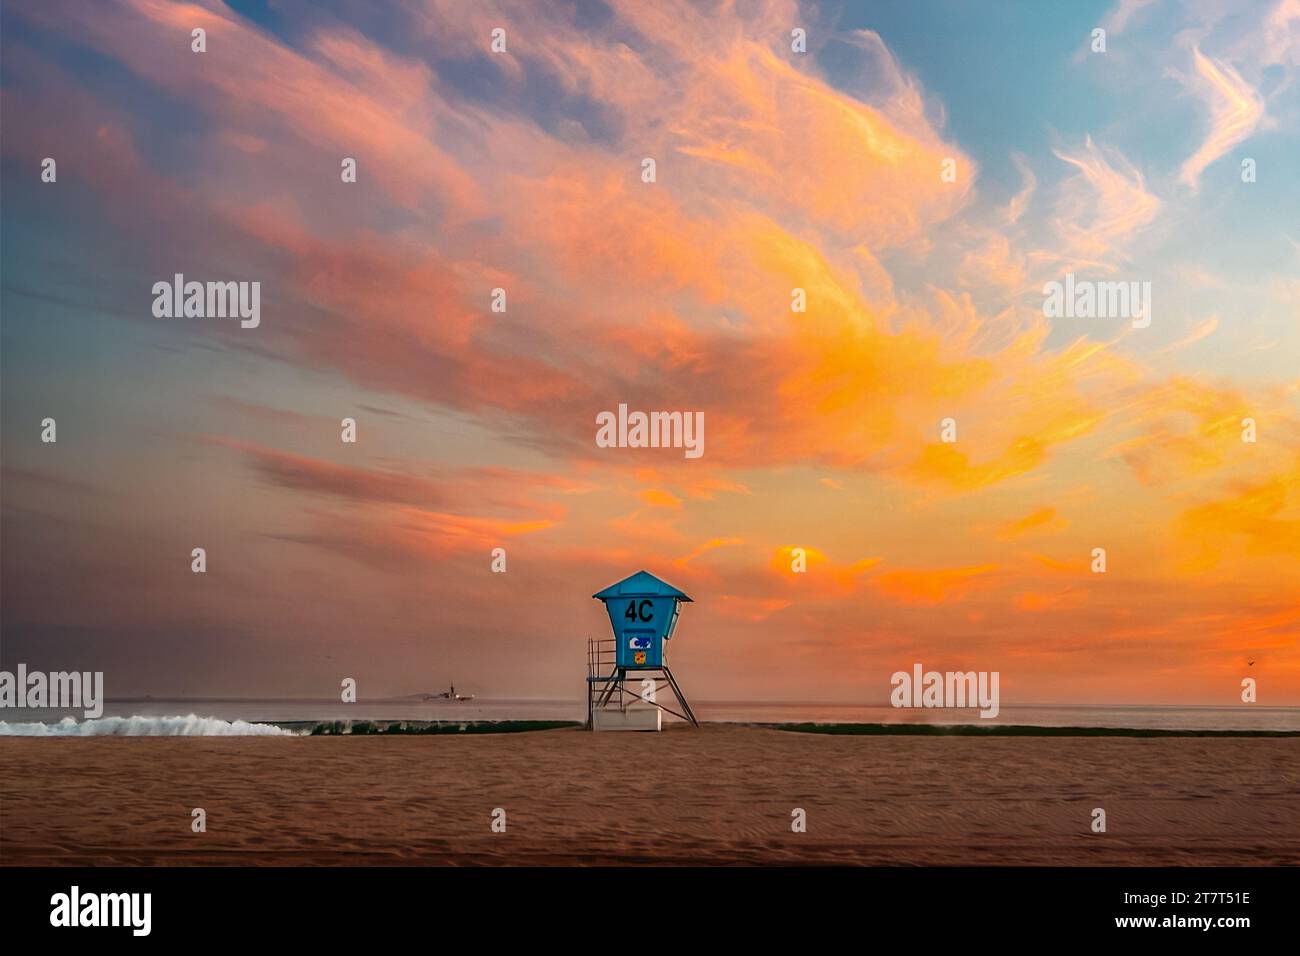 Lifeguard stand in front of sunset sky Stock Photo